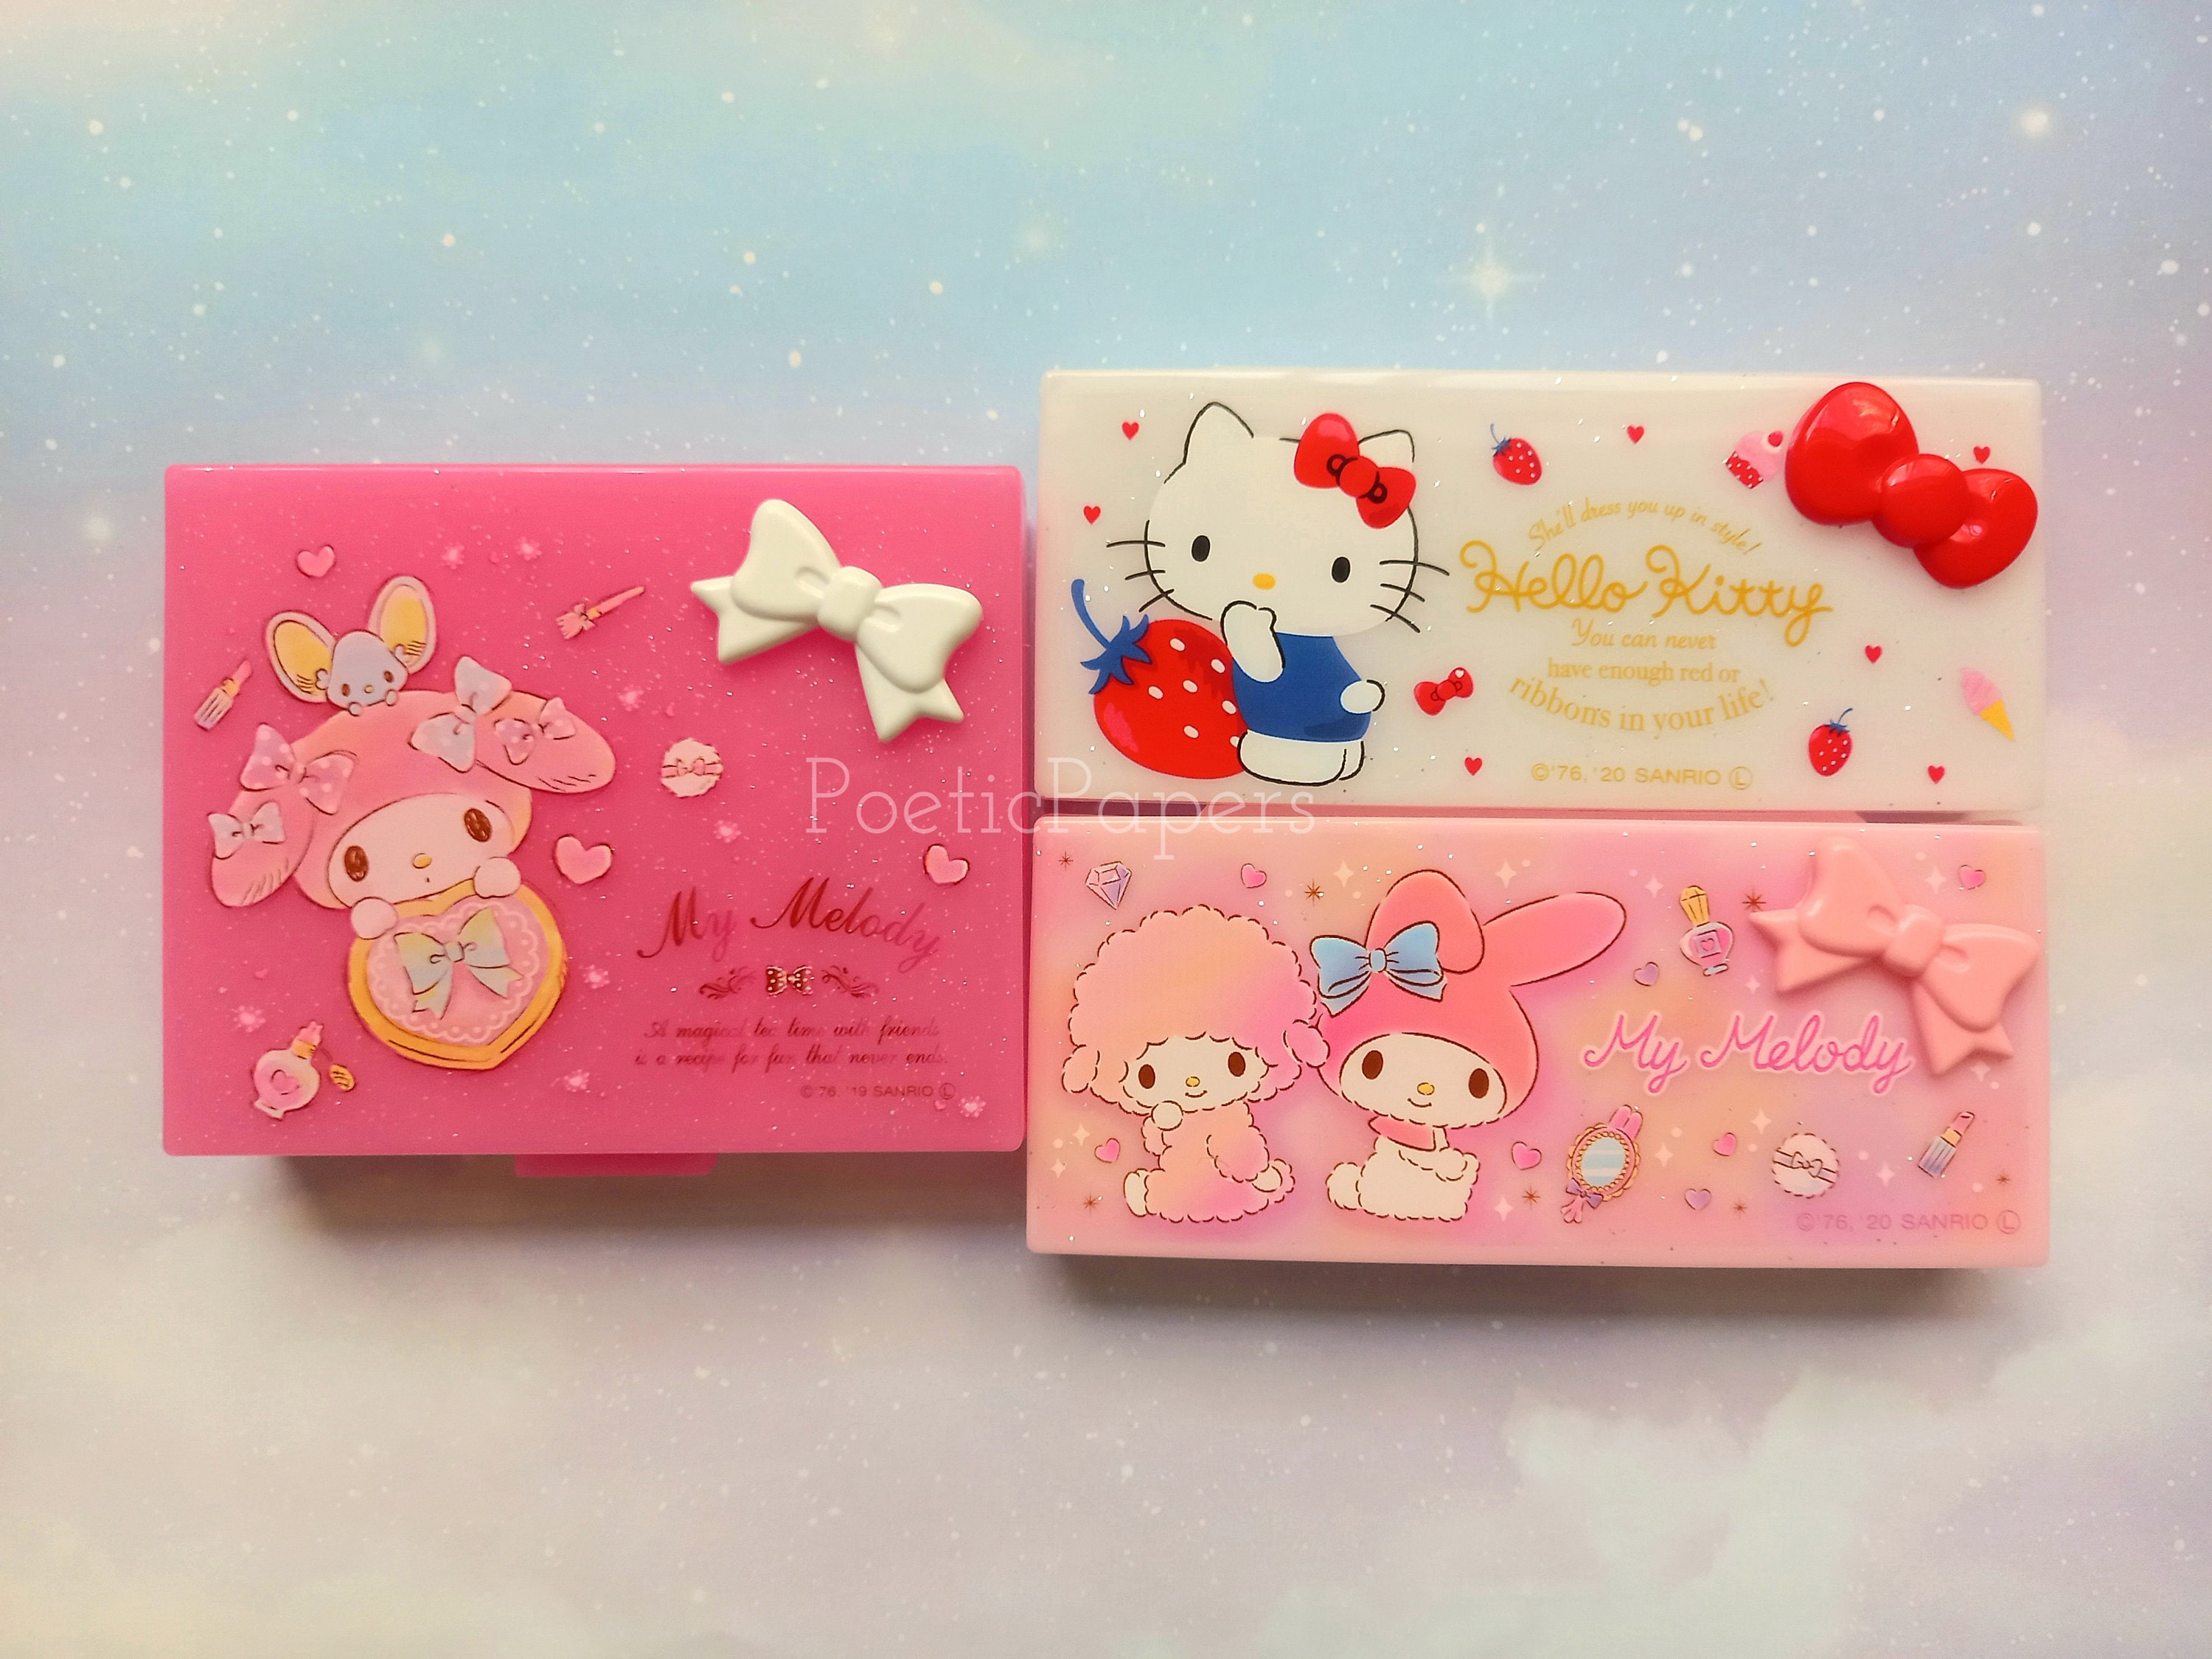 Kawaii Hello Kitty Portable Pill Box Case 7 Days A Week Organizer Pills Box  for Tablets Medicine Sub-Packed Jewelry Storage Gift